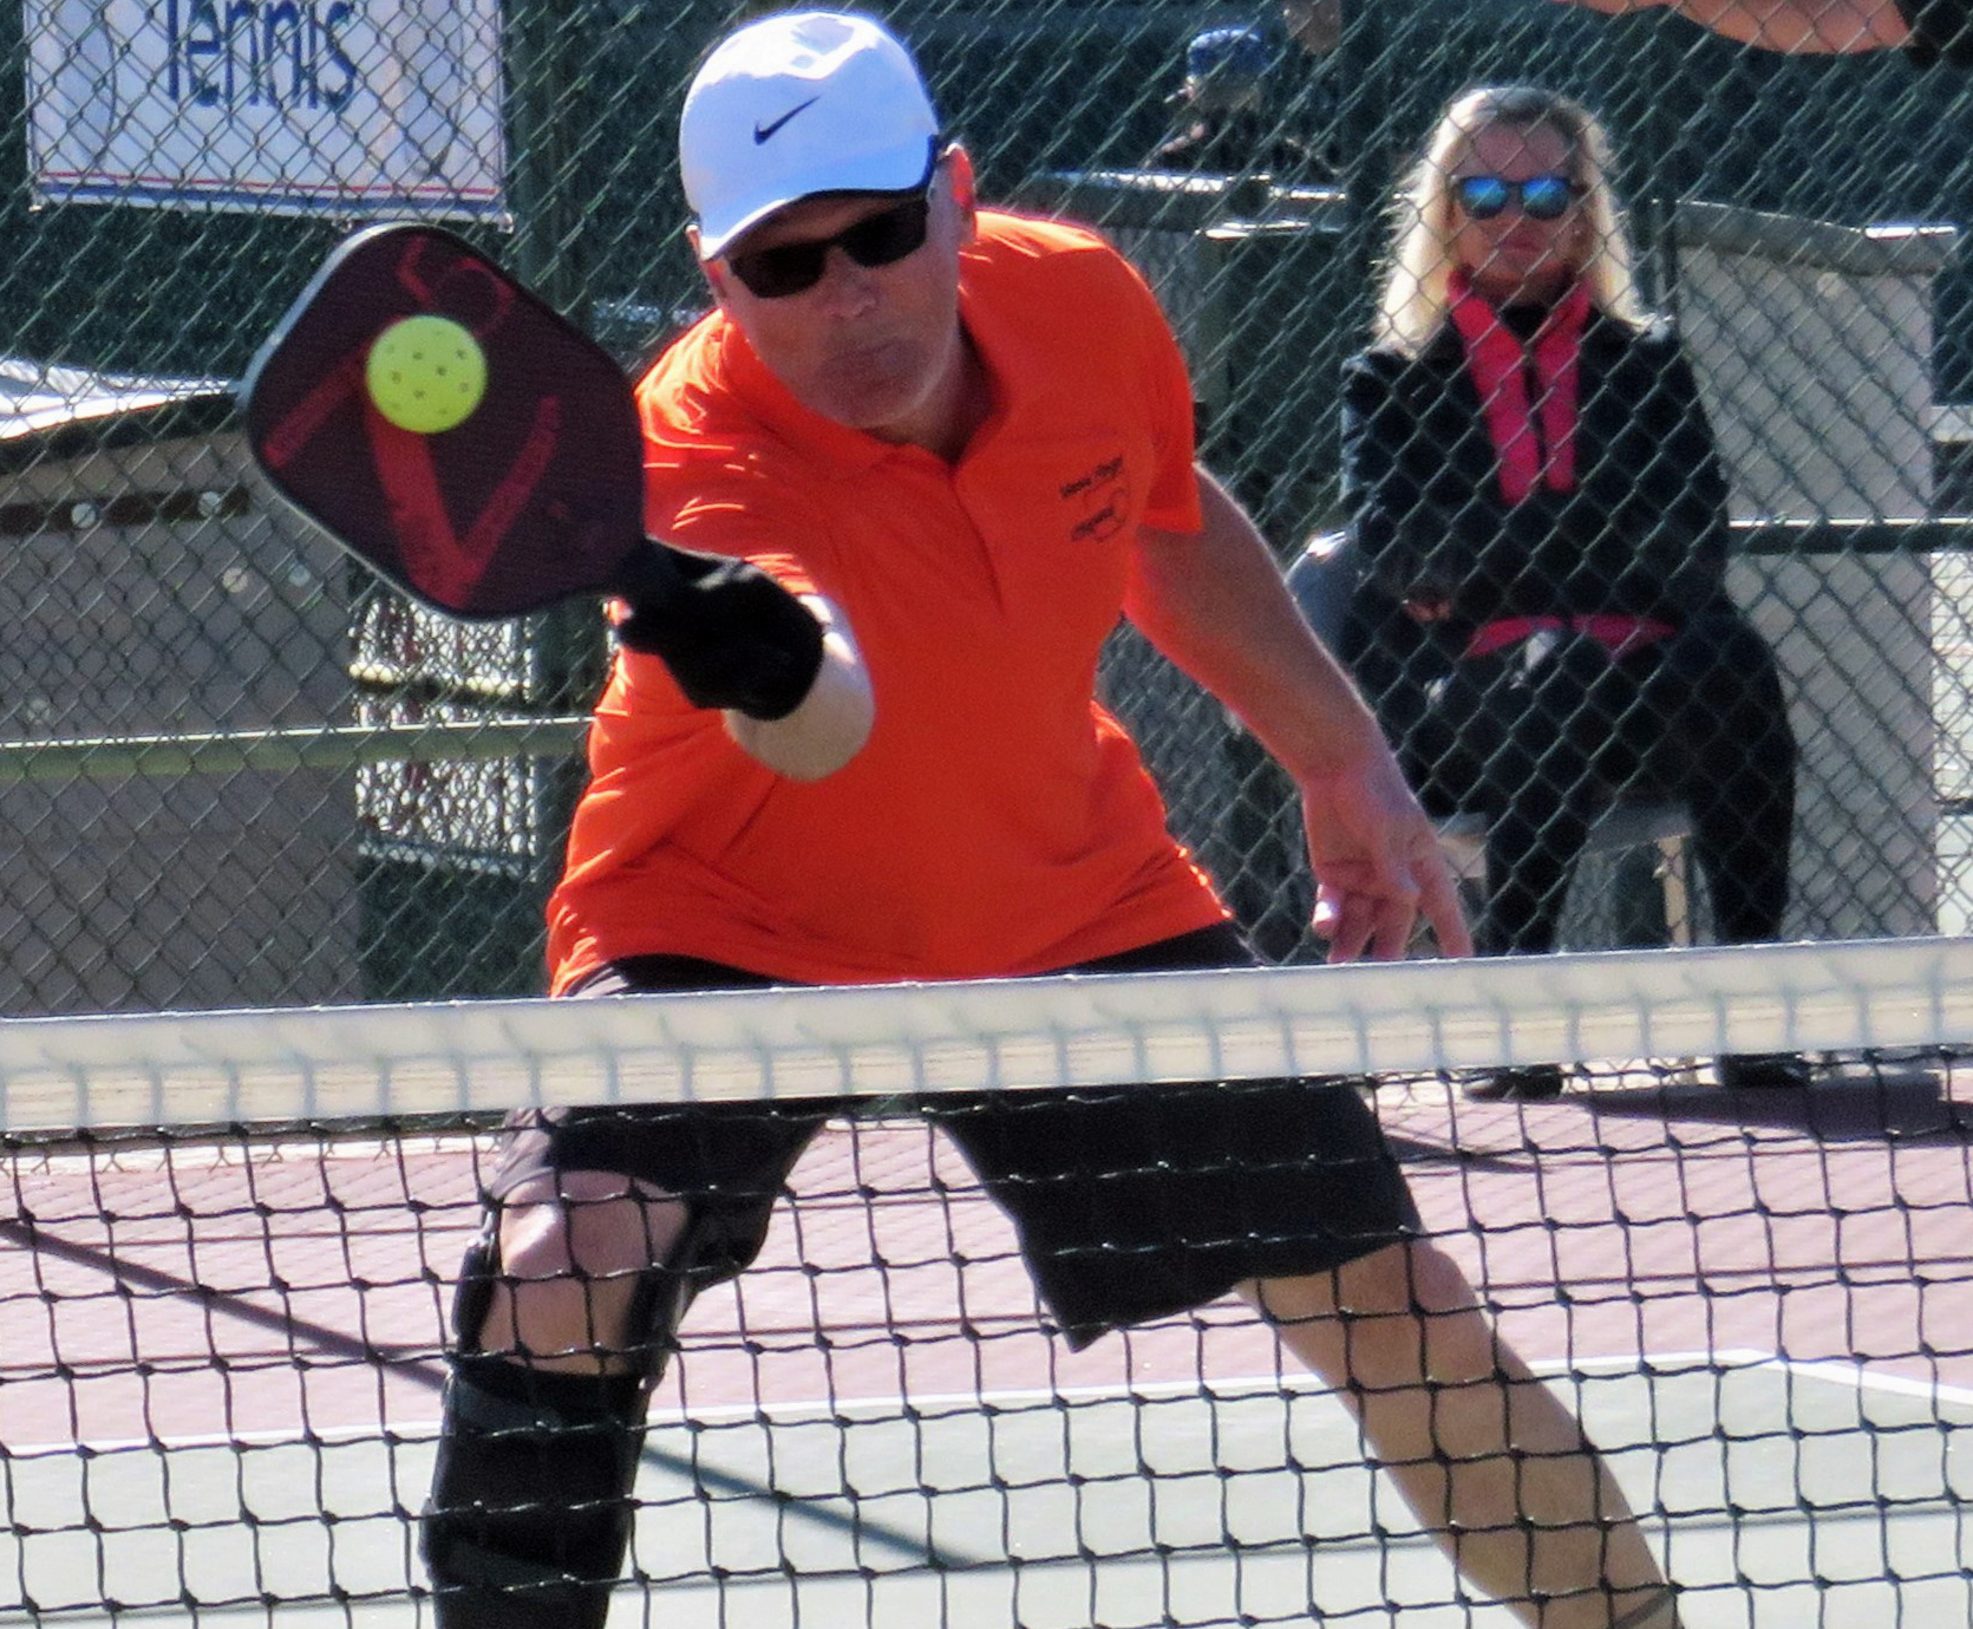 Alabama Open Pickleball tournament begins Thursday in Clay